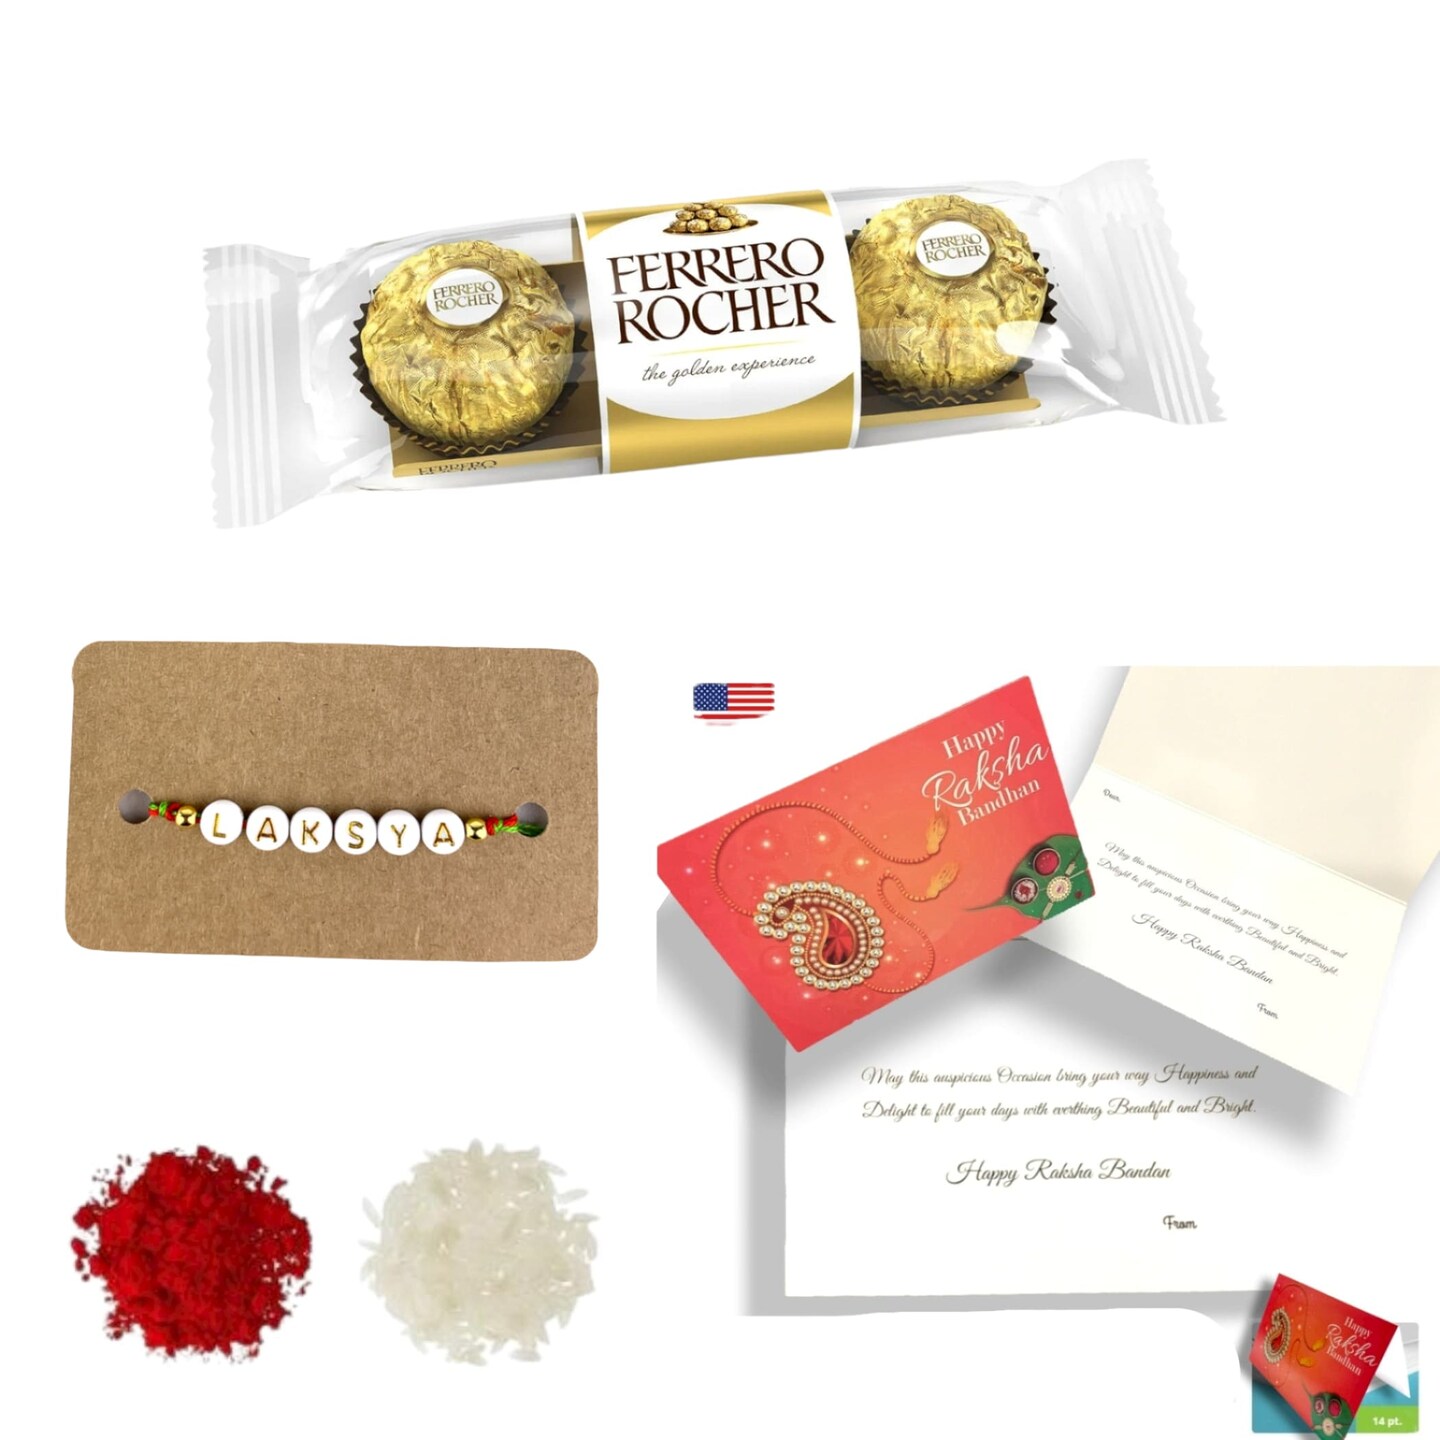 Unique Raksha Bandhan Gift Ideas That Are Something Different From  Traditional - Ideas, Inspirations & Updates